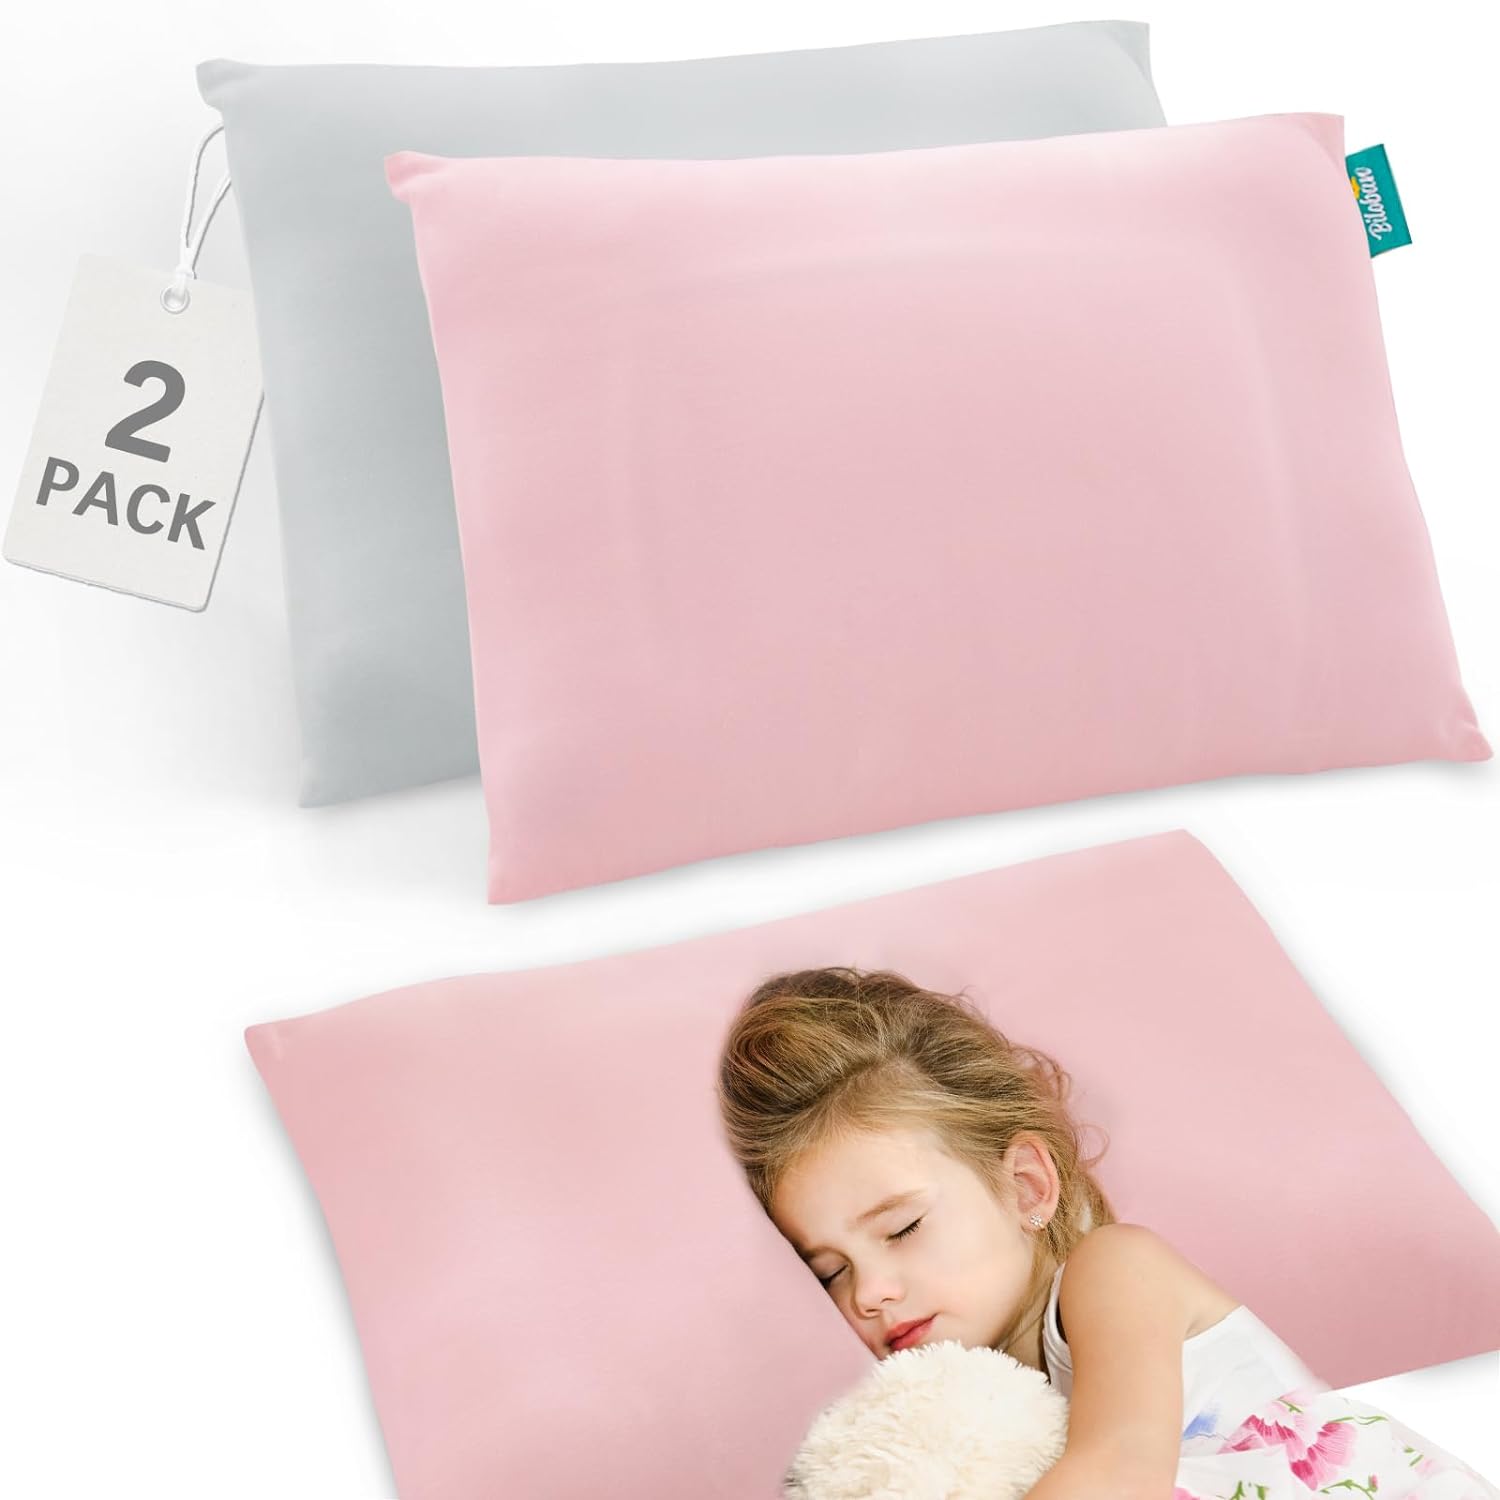 Toddler Pillow Quilted with Pillowcase - 2 Pack, 13" x 18", 100% Cotton, Ultra Soft & Breathable, Grey & Pink - Biloban Online Store